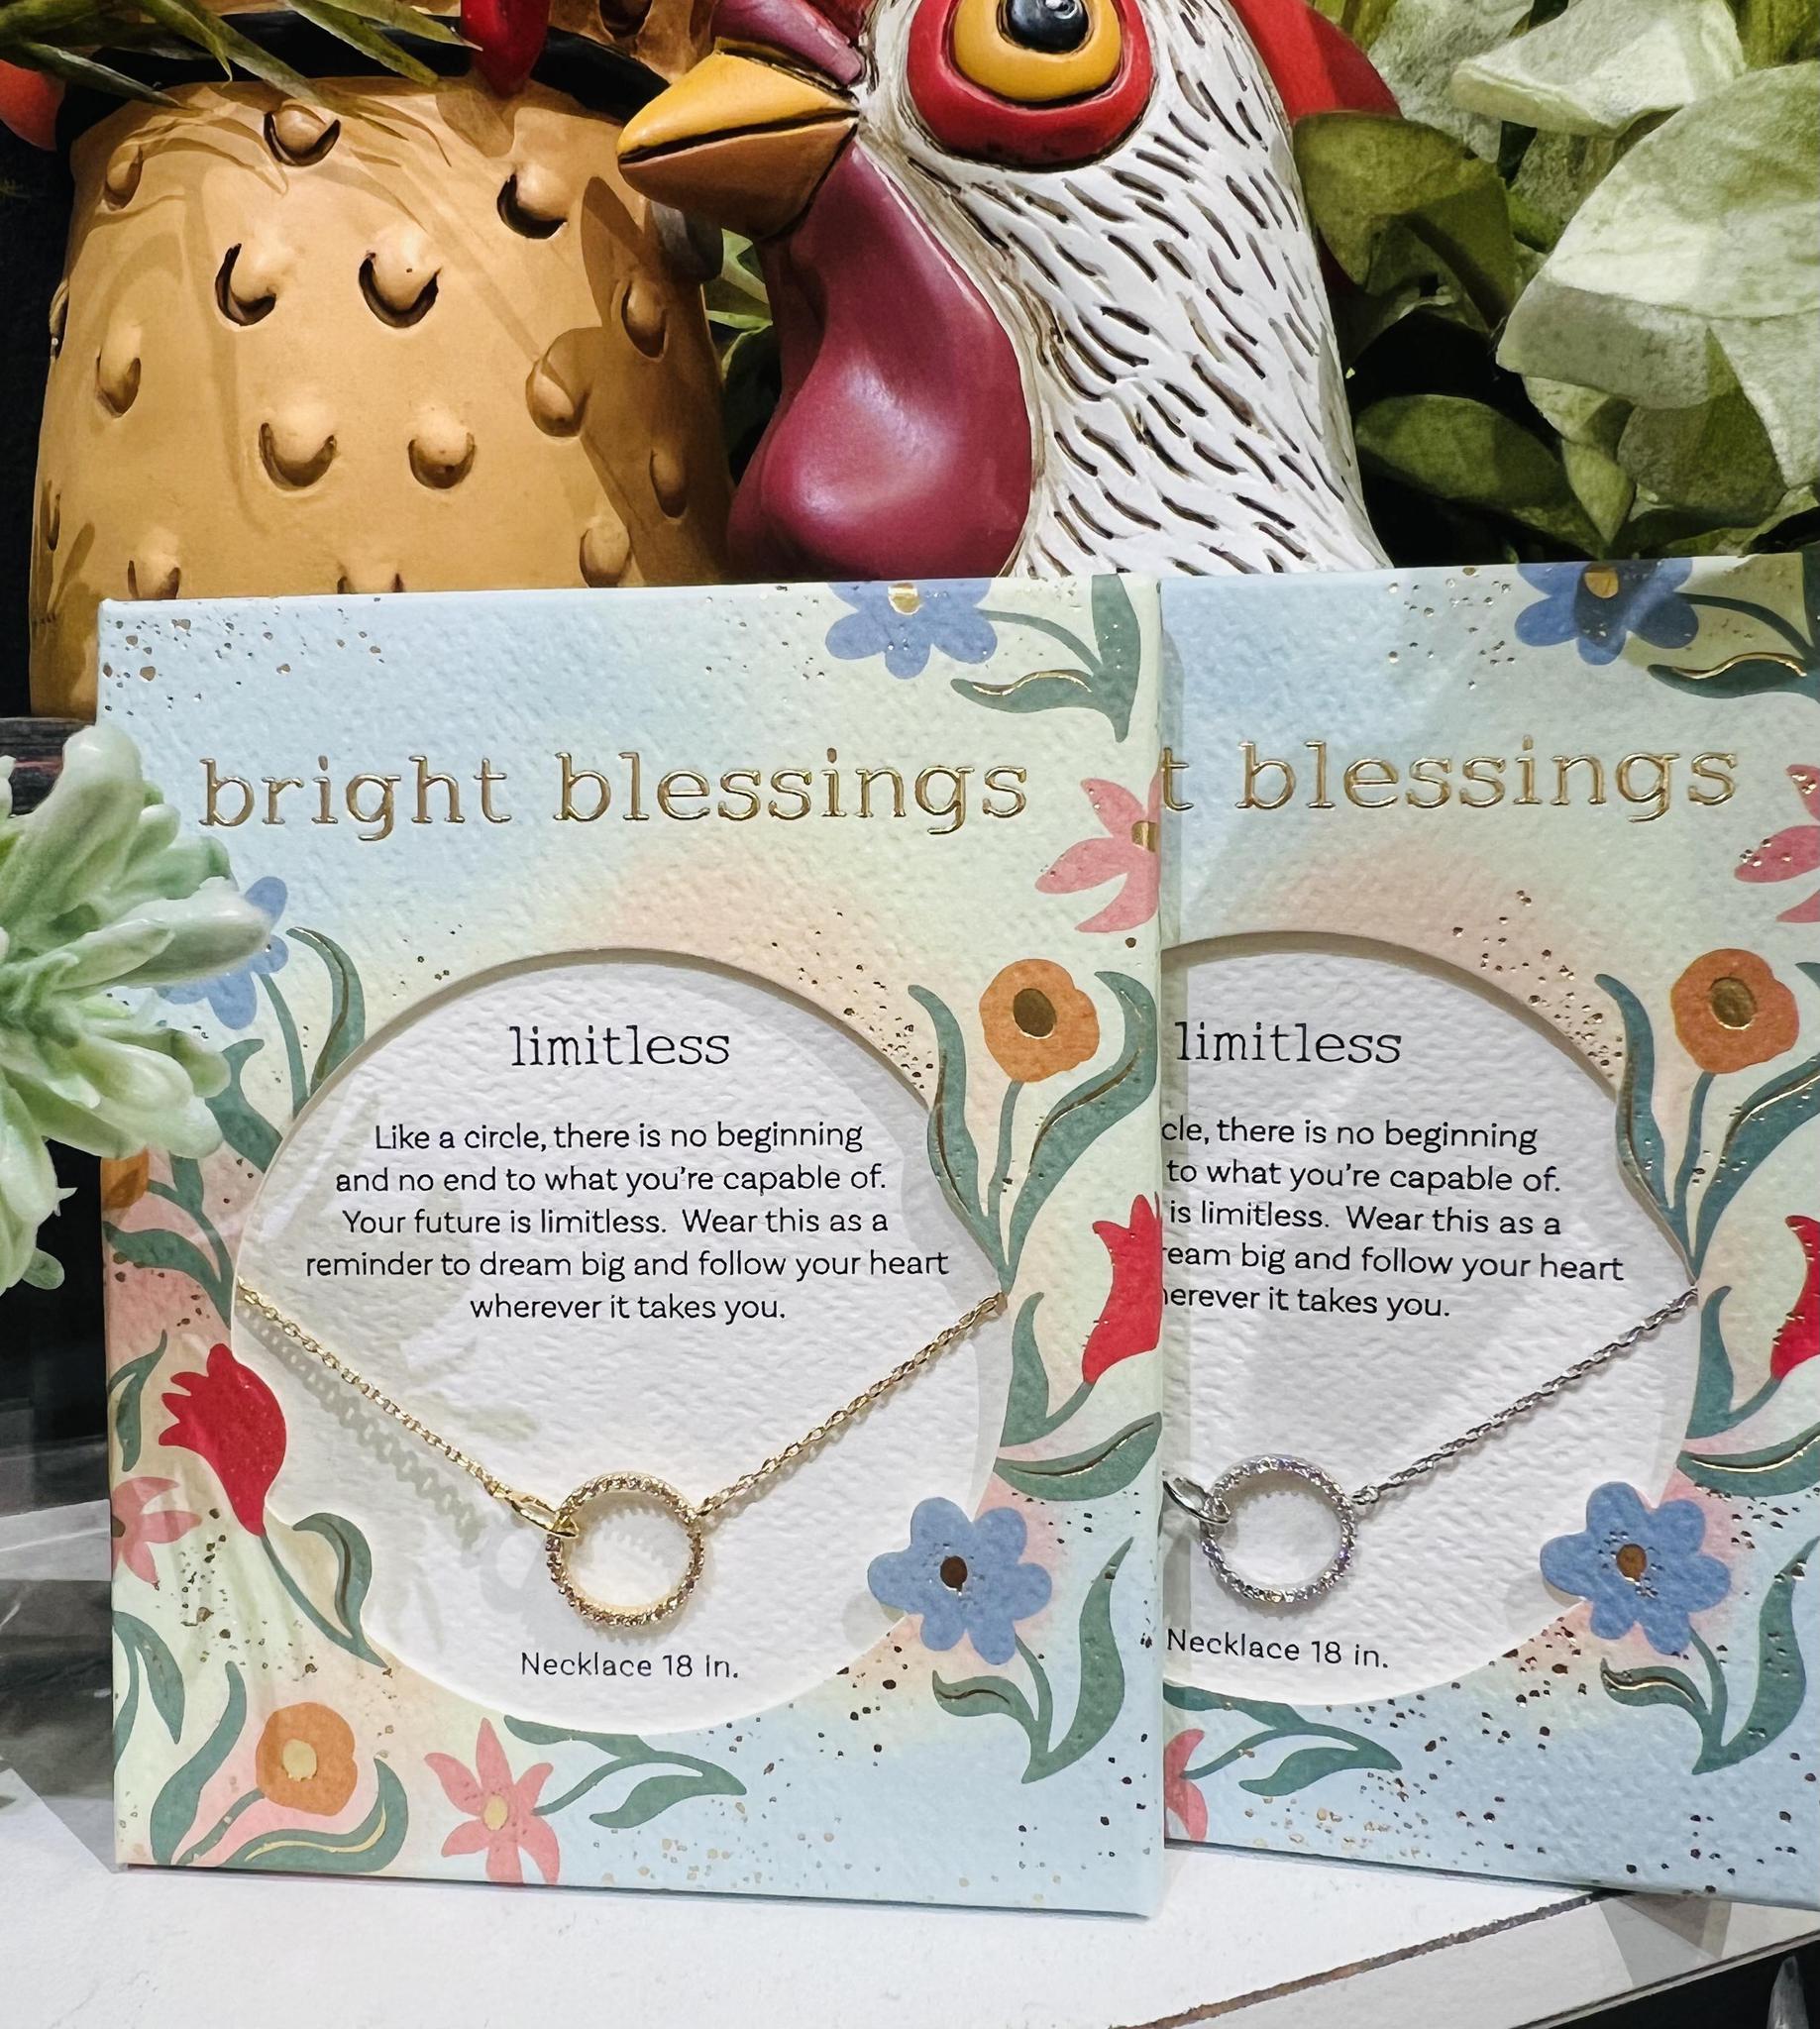 Bright Blessings Limitless Necklace